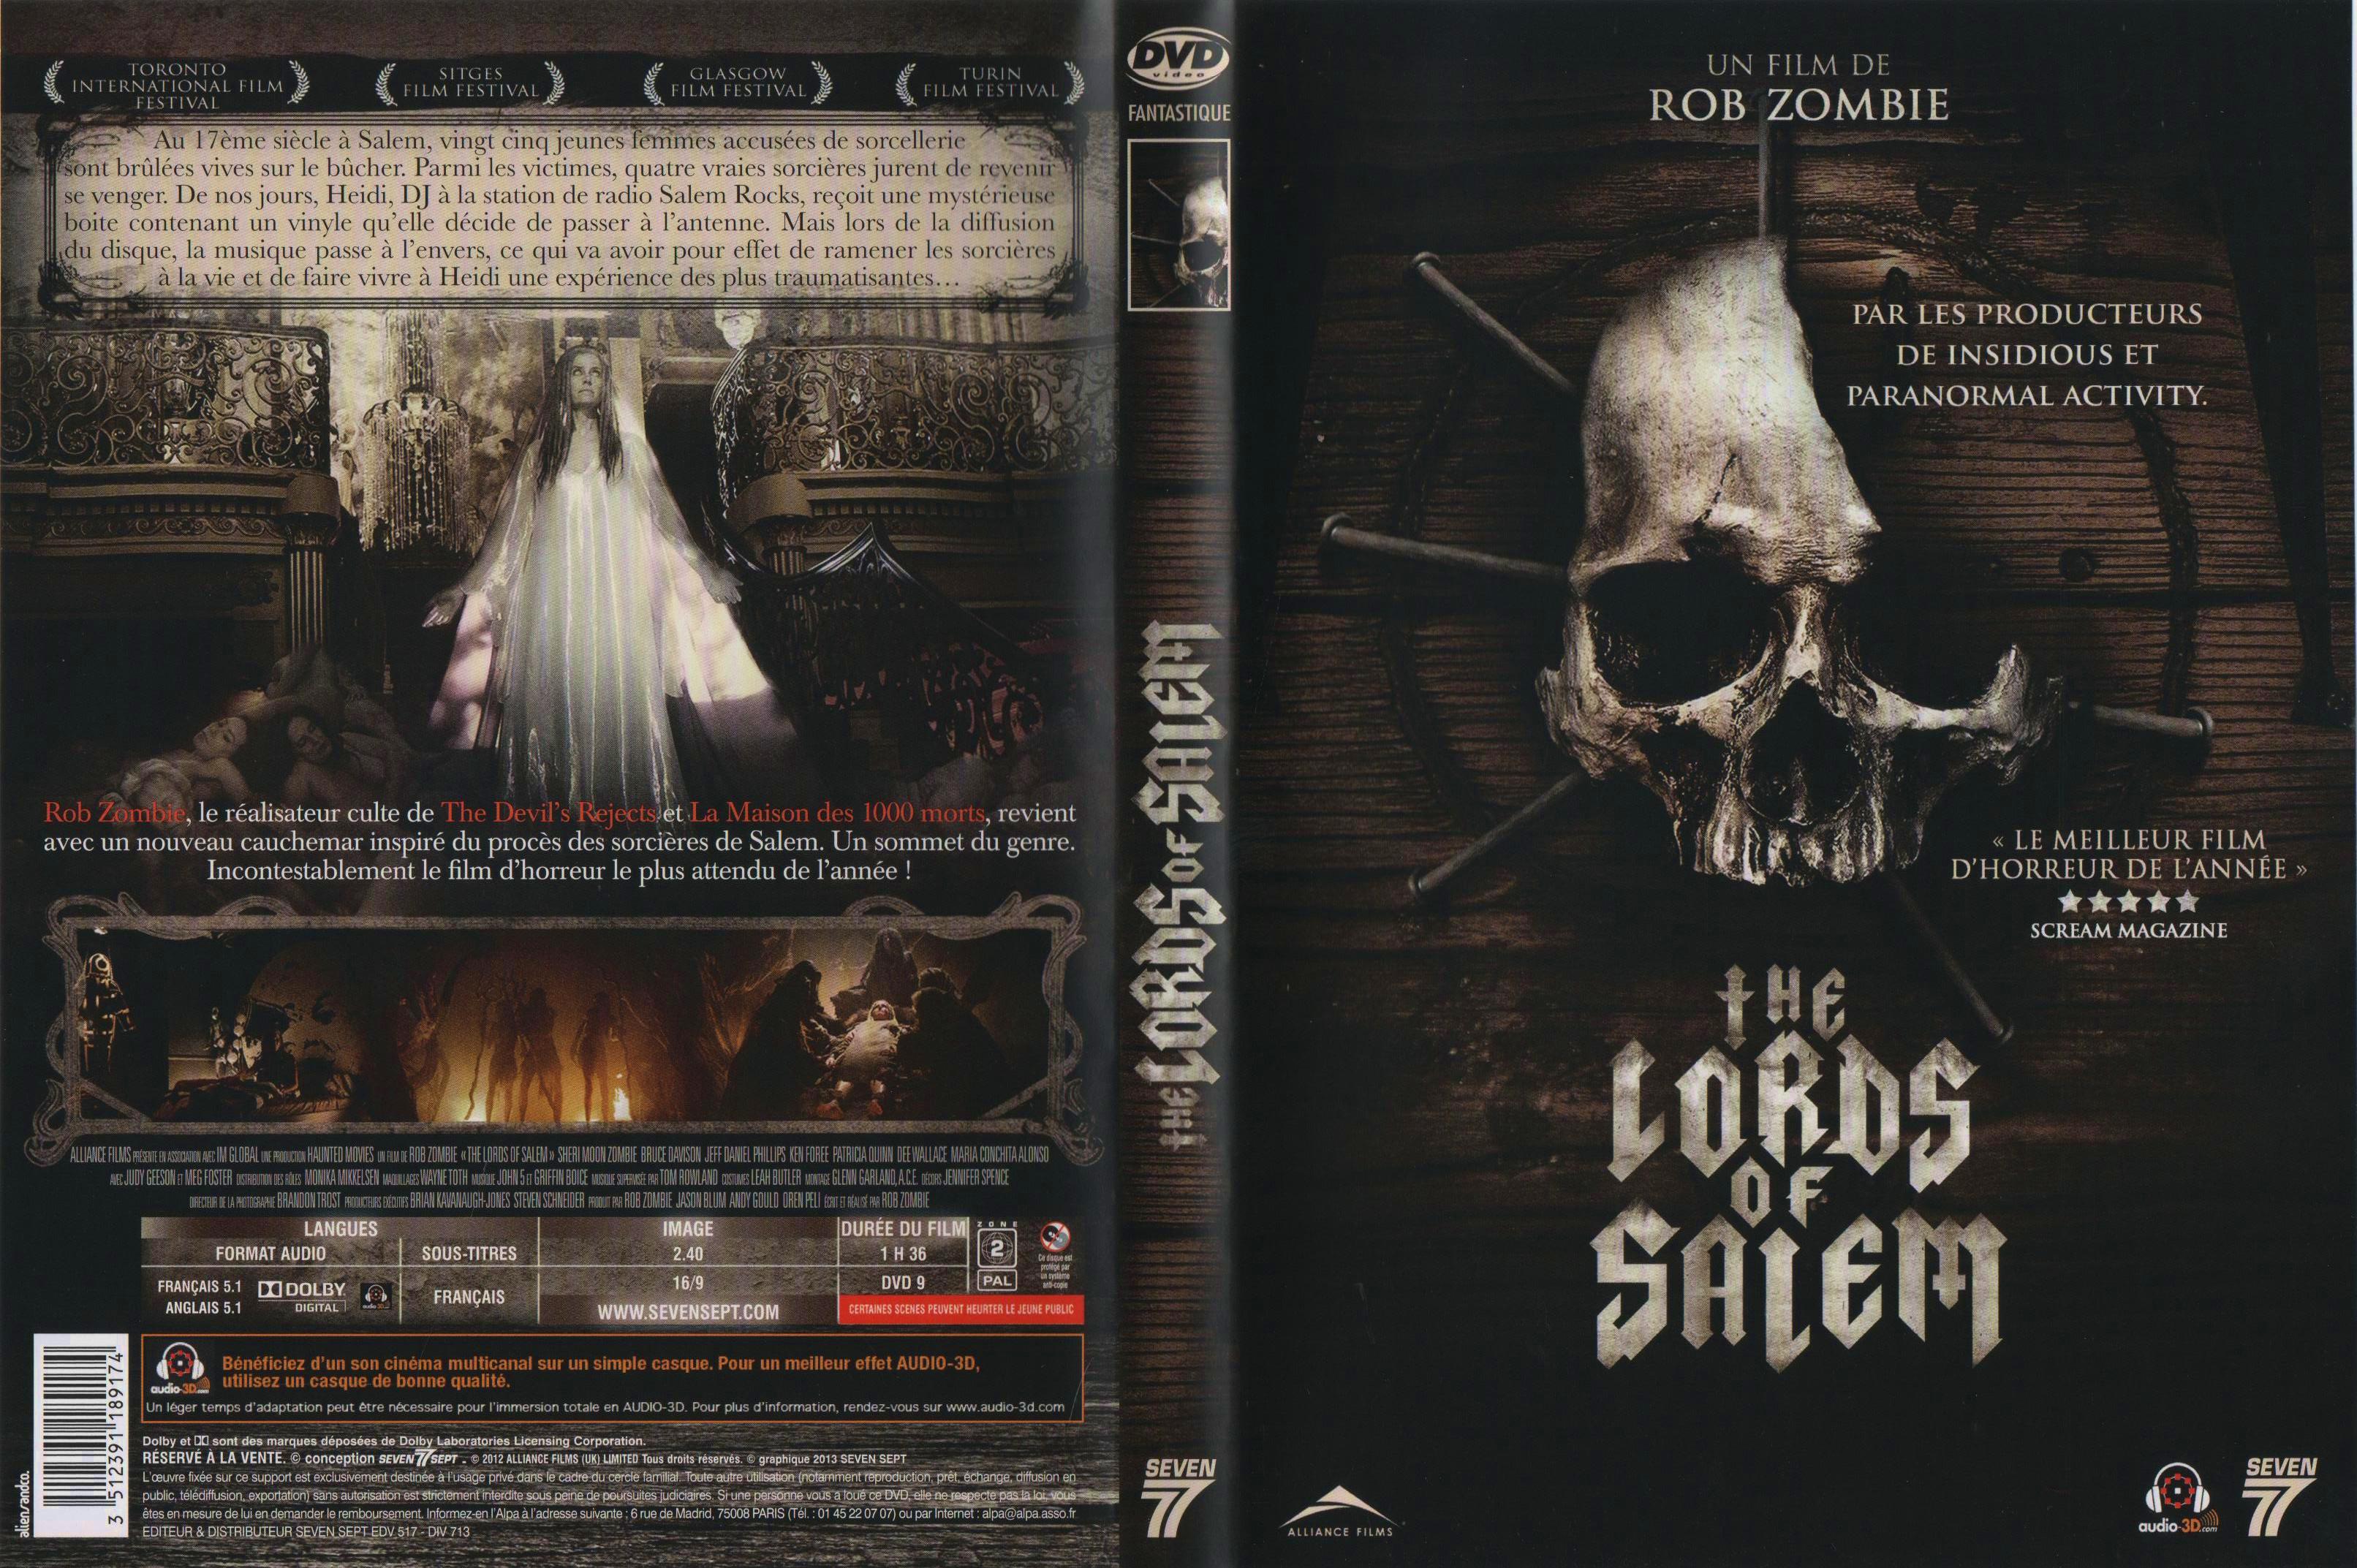 Jaquette DVD The lords of salem